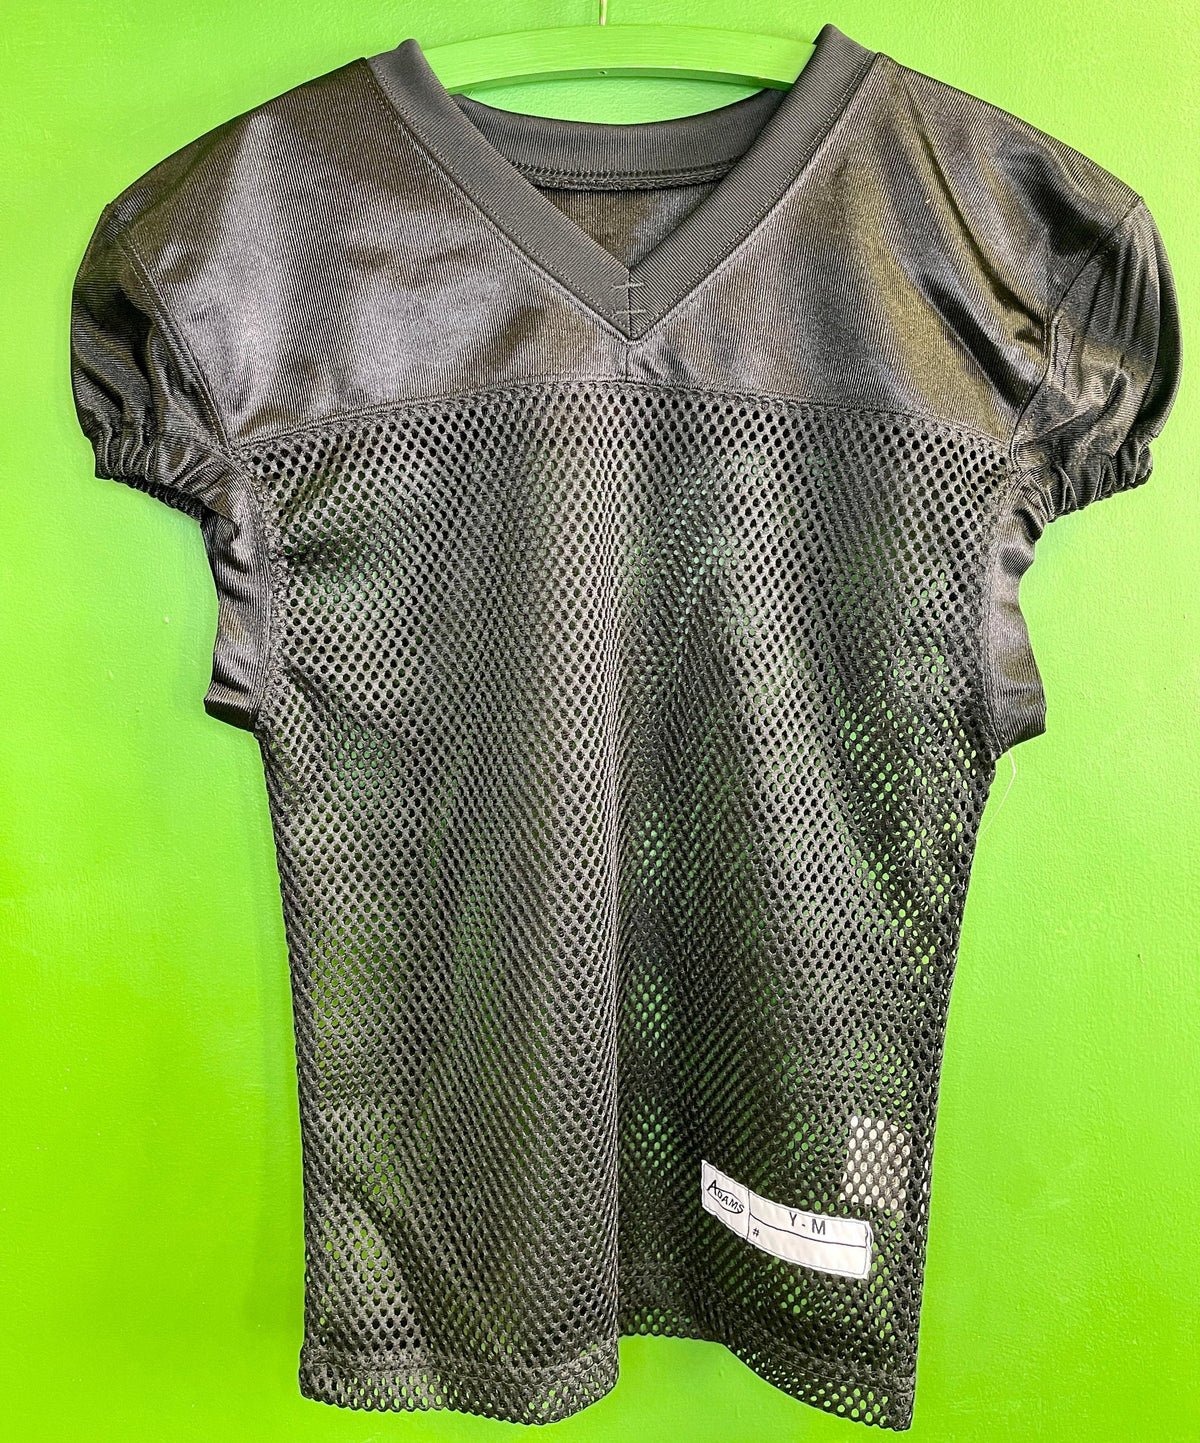 NFL NCAA American Football Practise Scrimmage Jersey Youth Medium 10-12